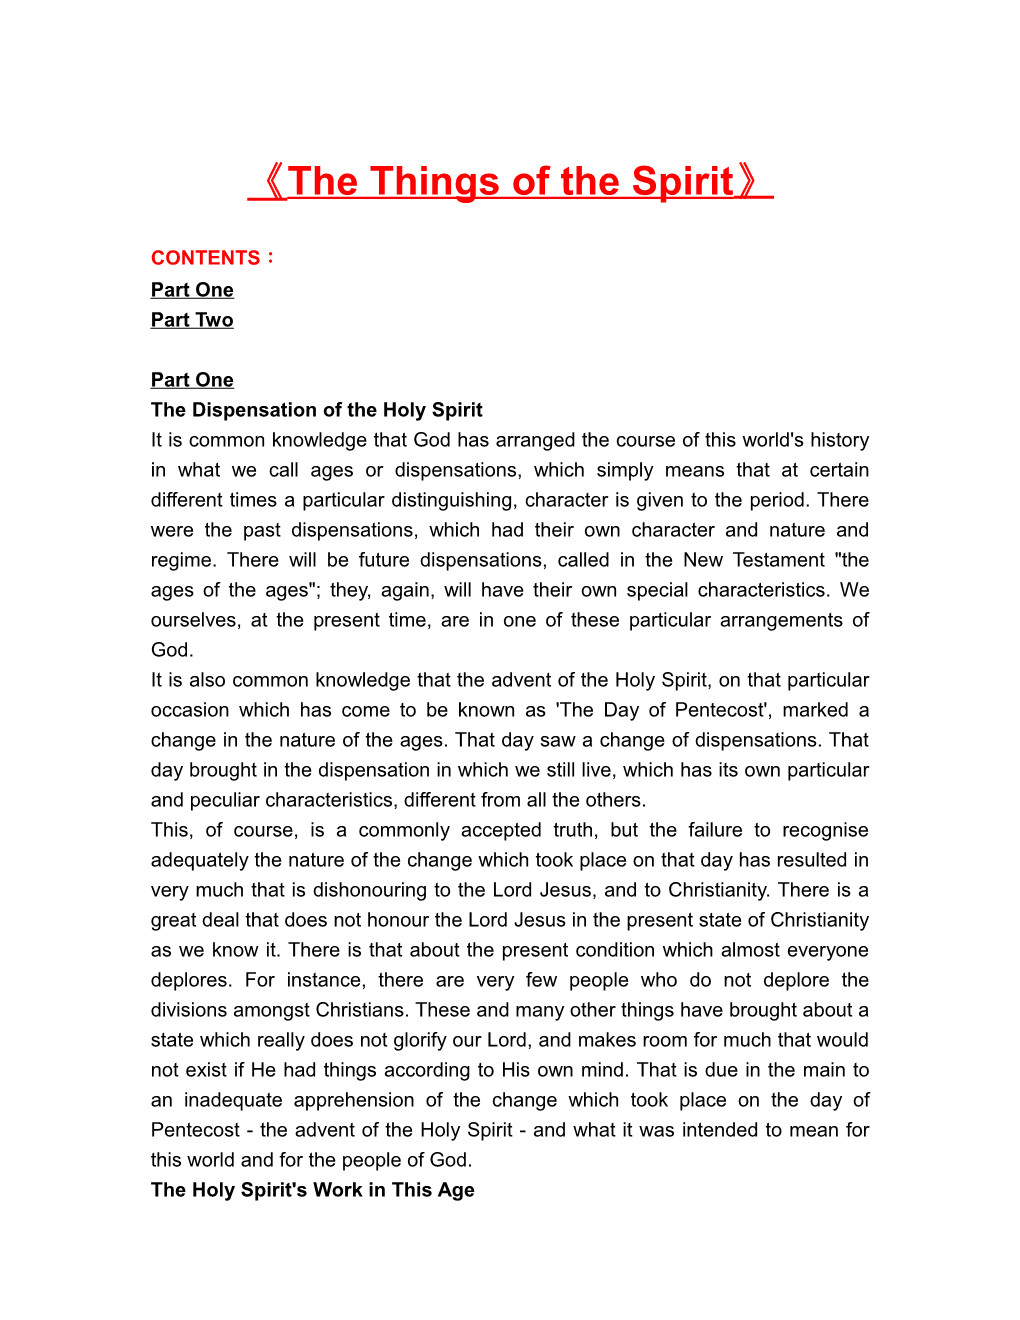 The Things of the Spirit